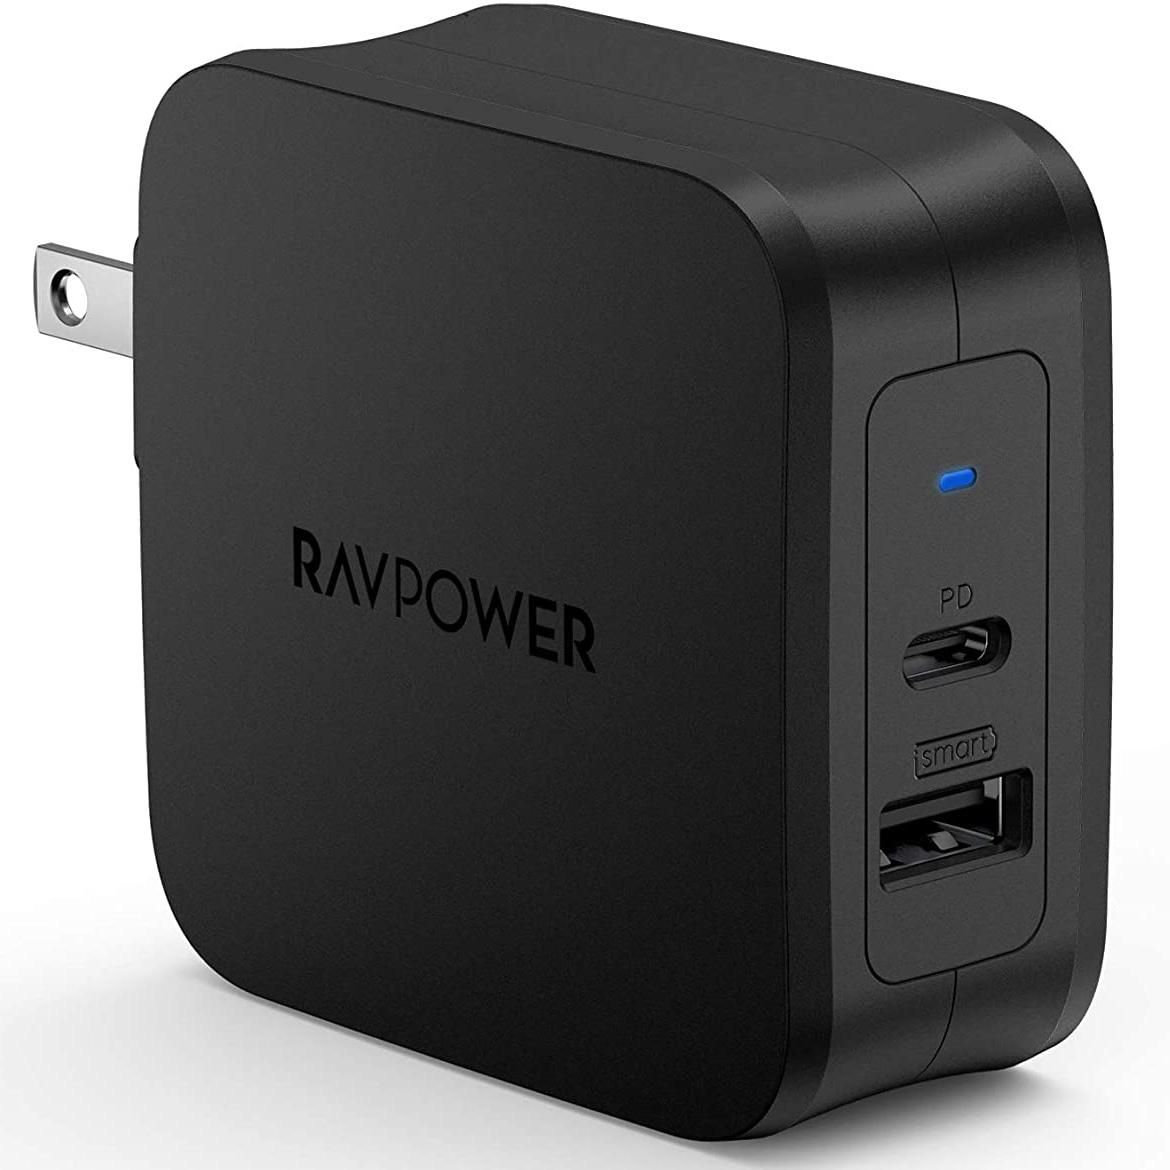 RAVPower 61W USB-C and USB Charger for $15.90